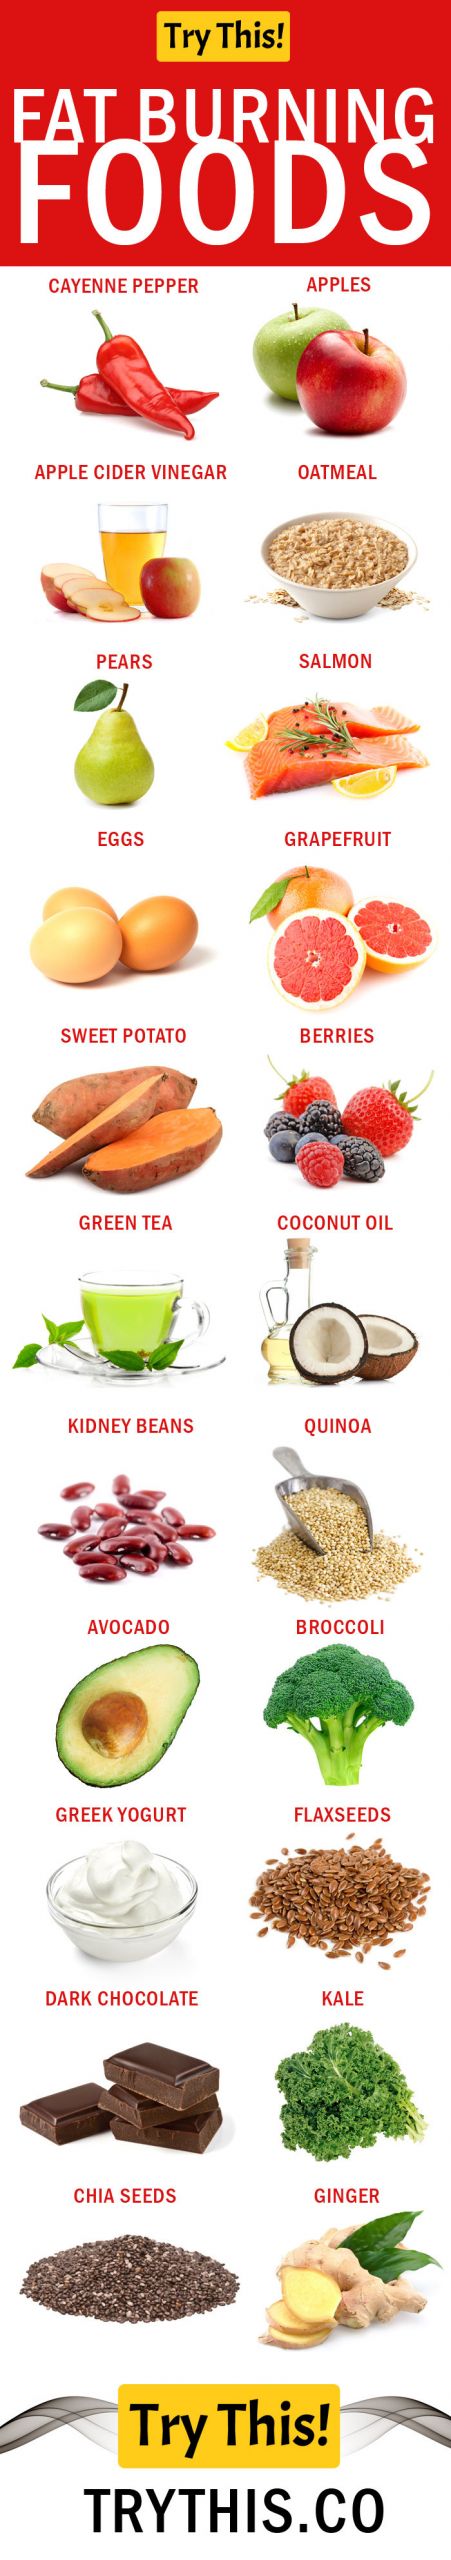 Fat Burning Foods
 Fat Burning Foods – Best Foods To Eat For Weight Loss